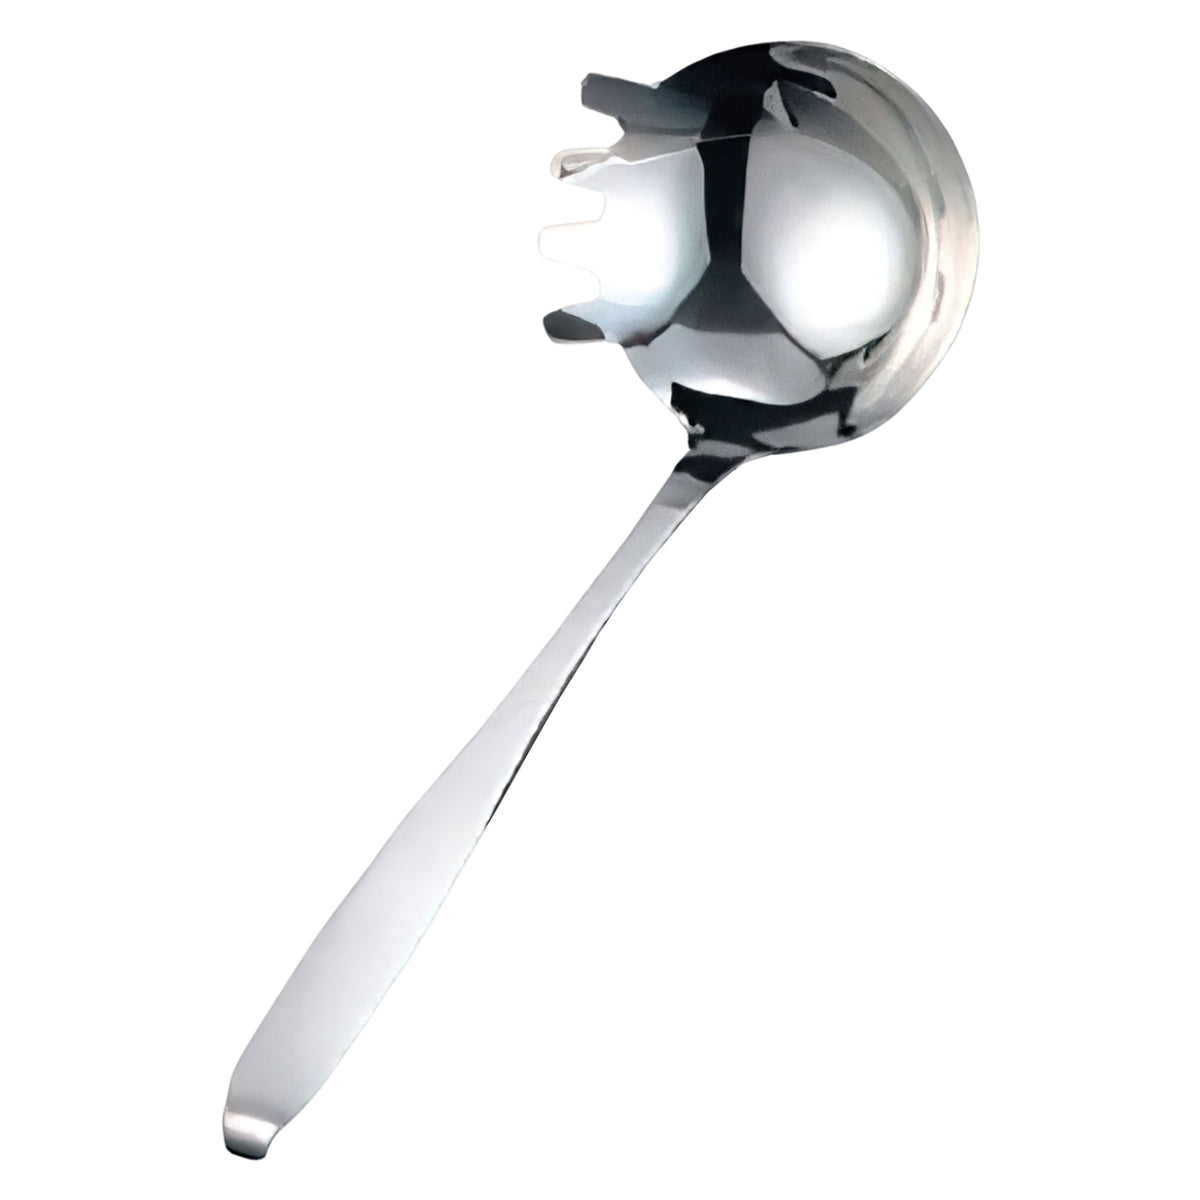 Nonoji Stainless Steel Comb-Shaped Ladle